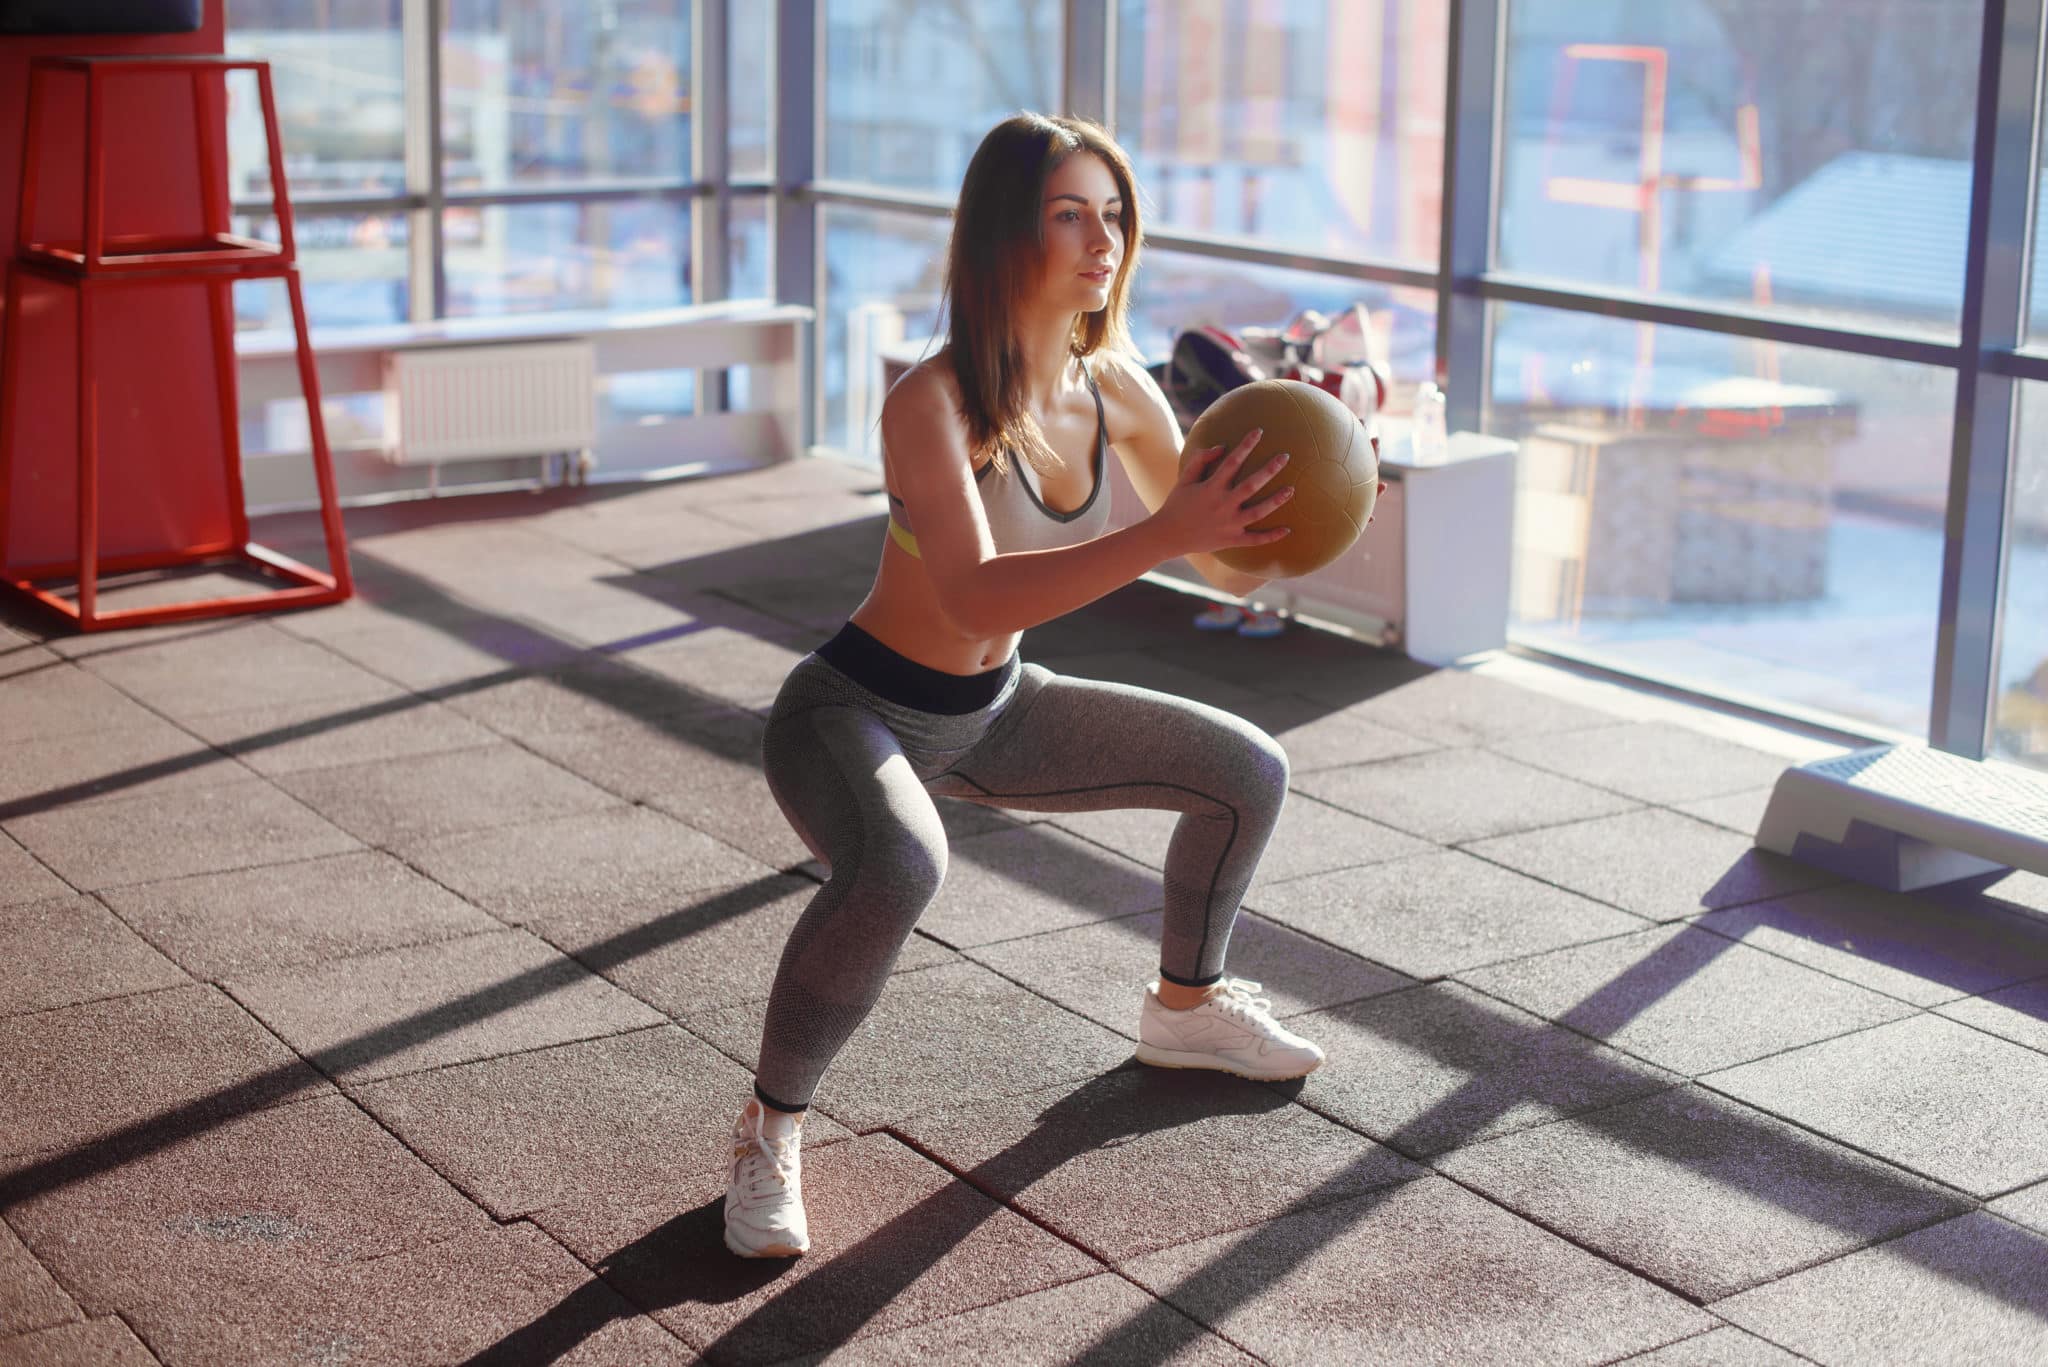 Young woman in apartment doing a squat with medicine ball